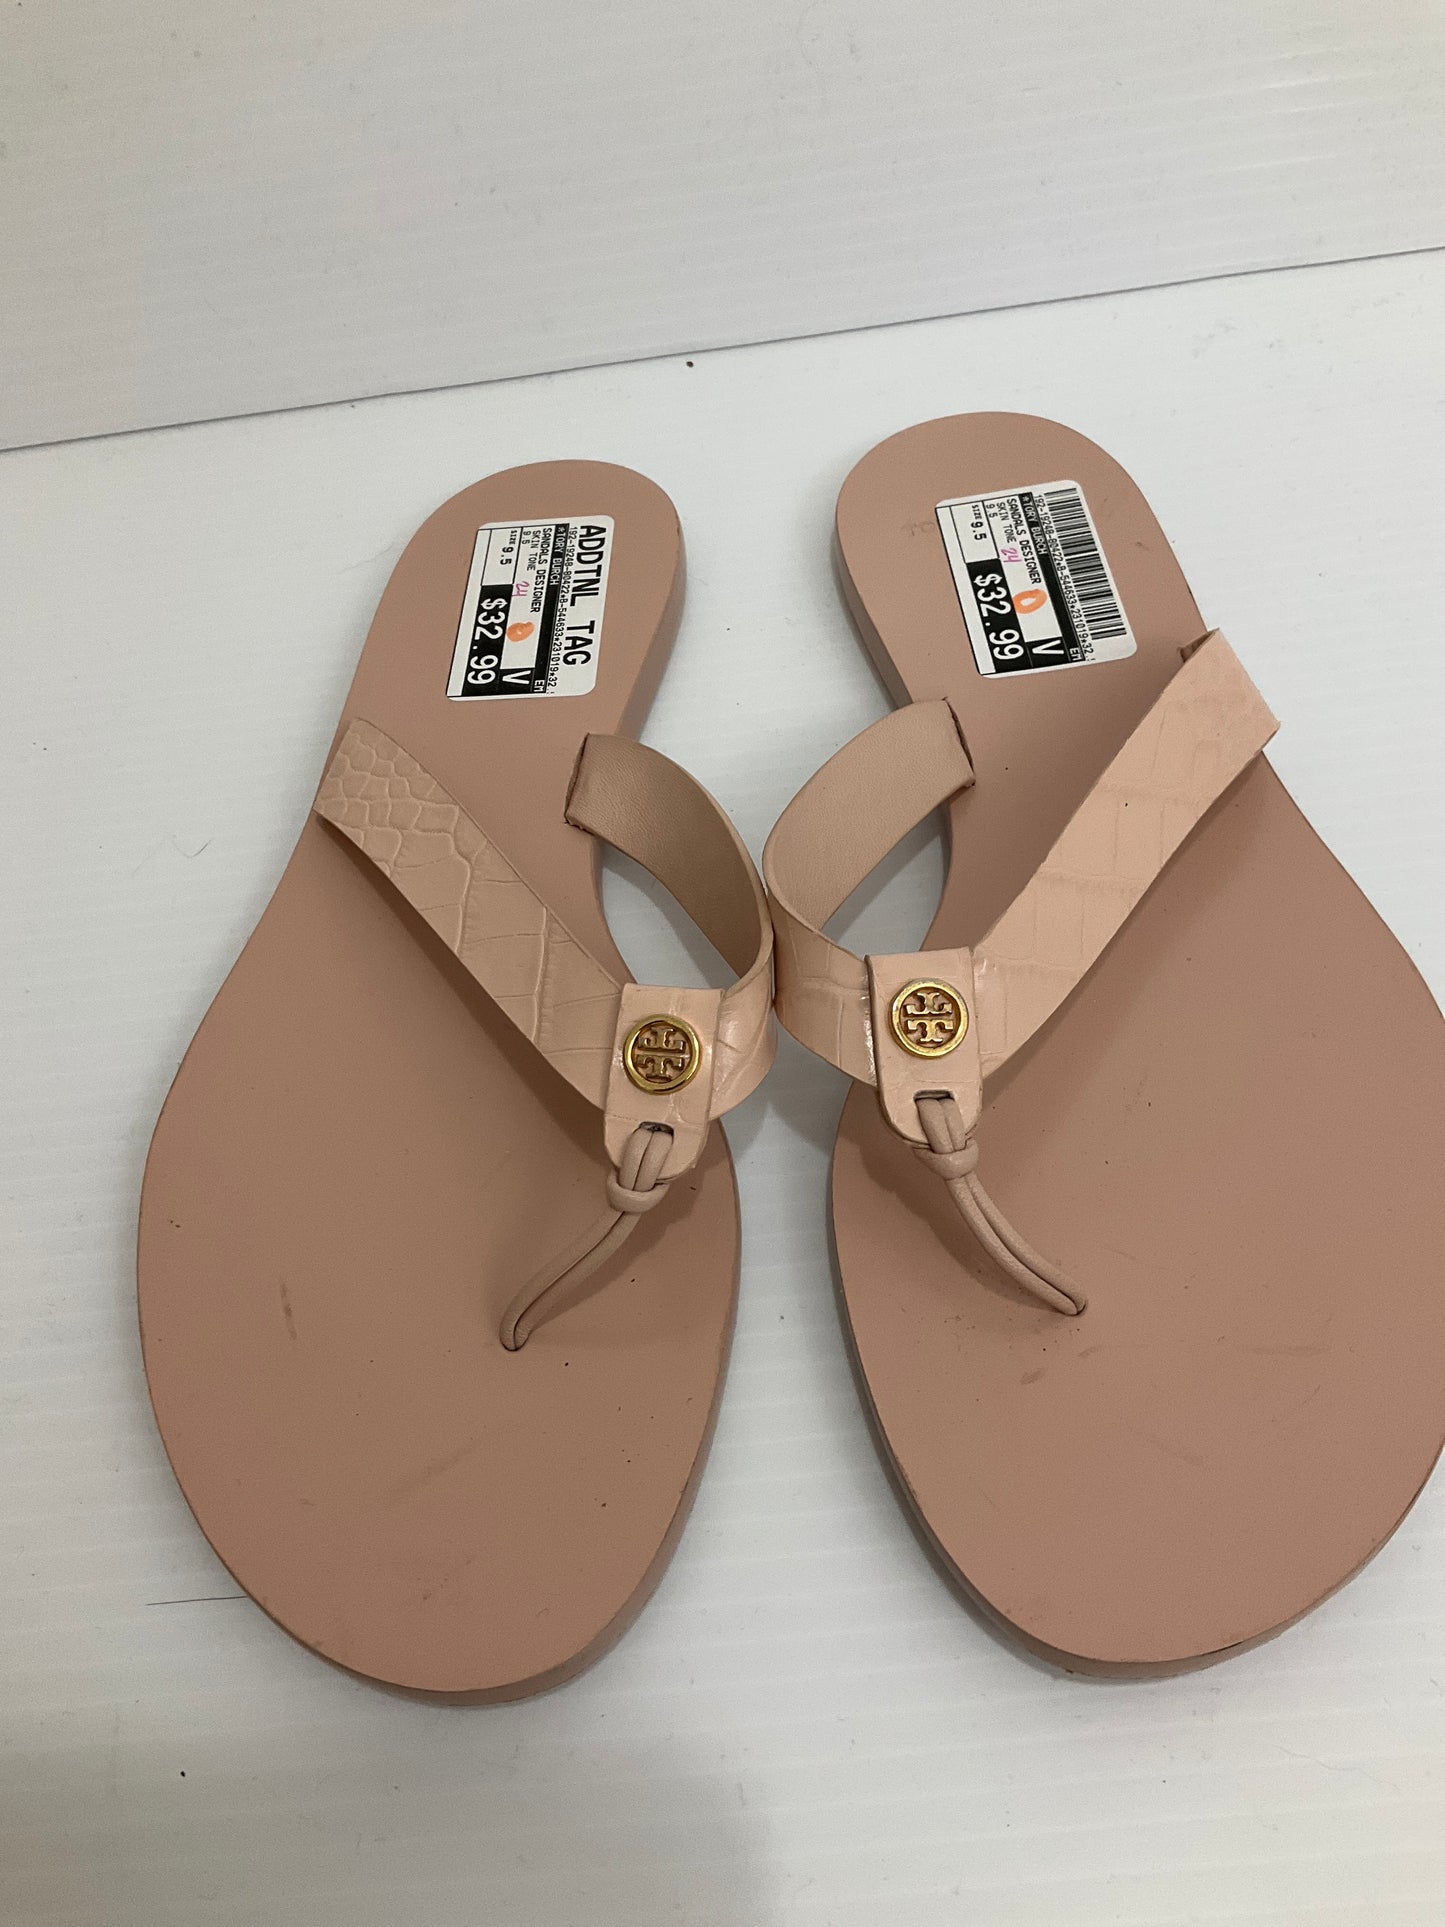 Sandals Designer By Tory Burch  Size: 9.5